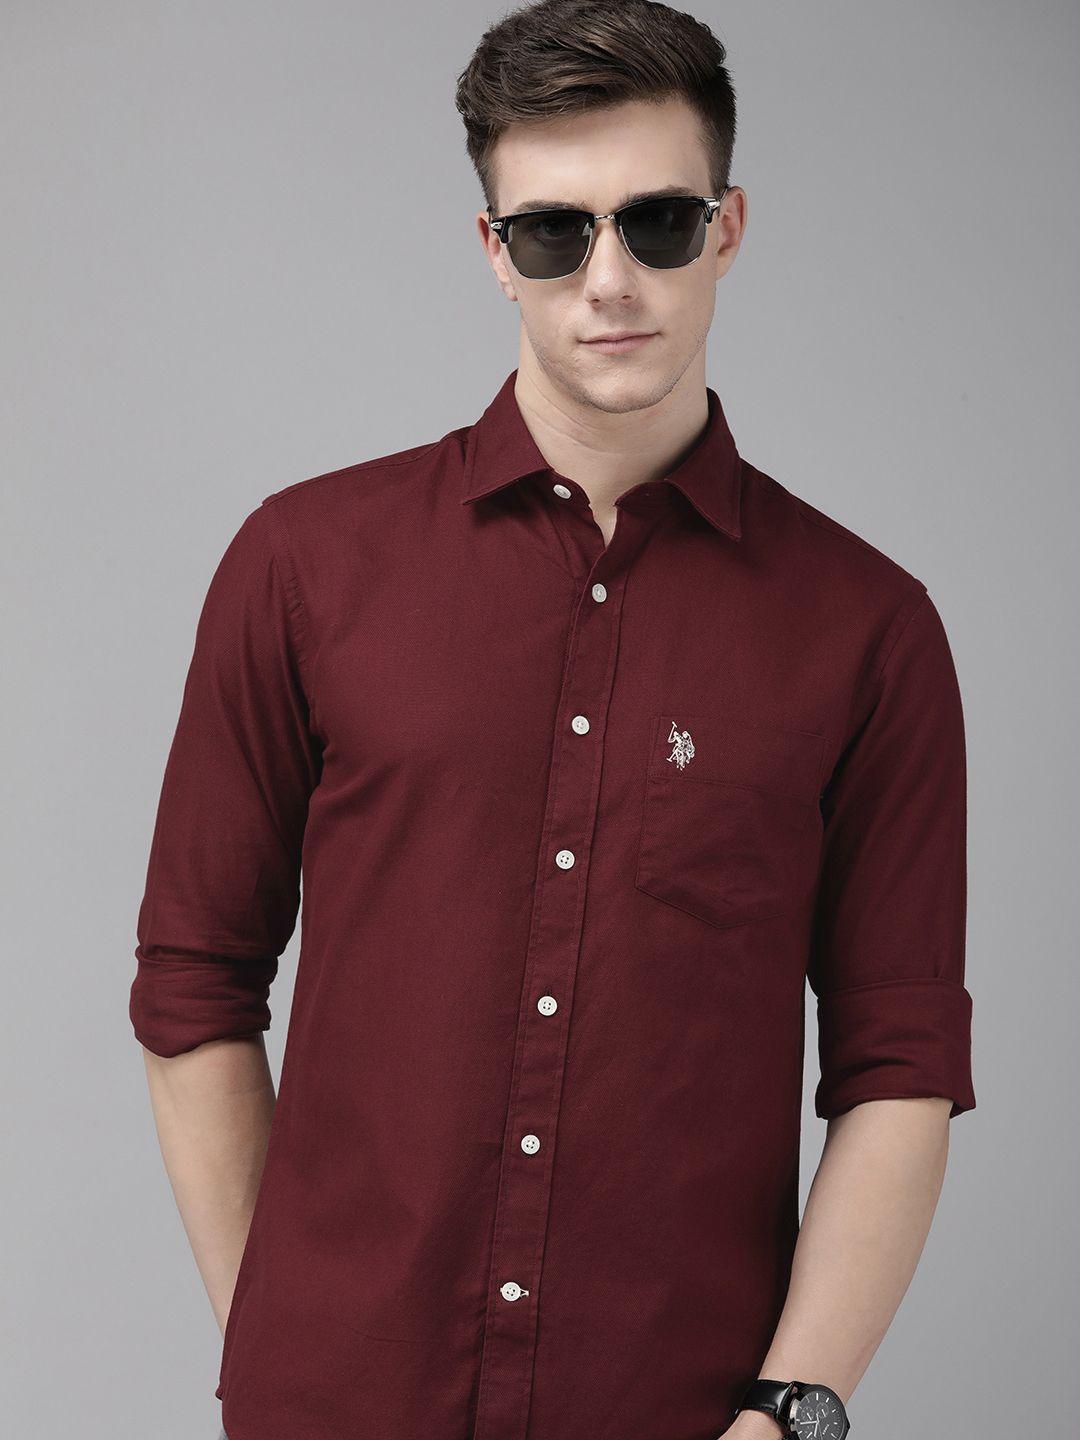 U.S. Polo Assn. Pure Cotton Tailored Fit Casual Shirt